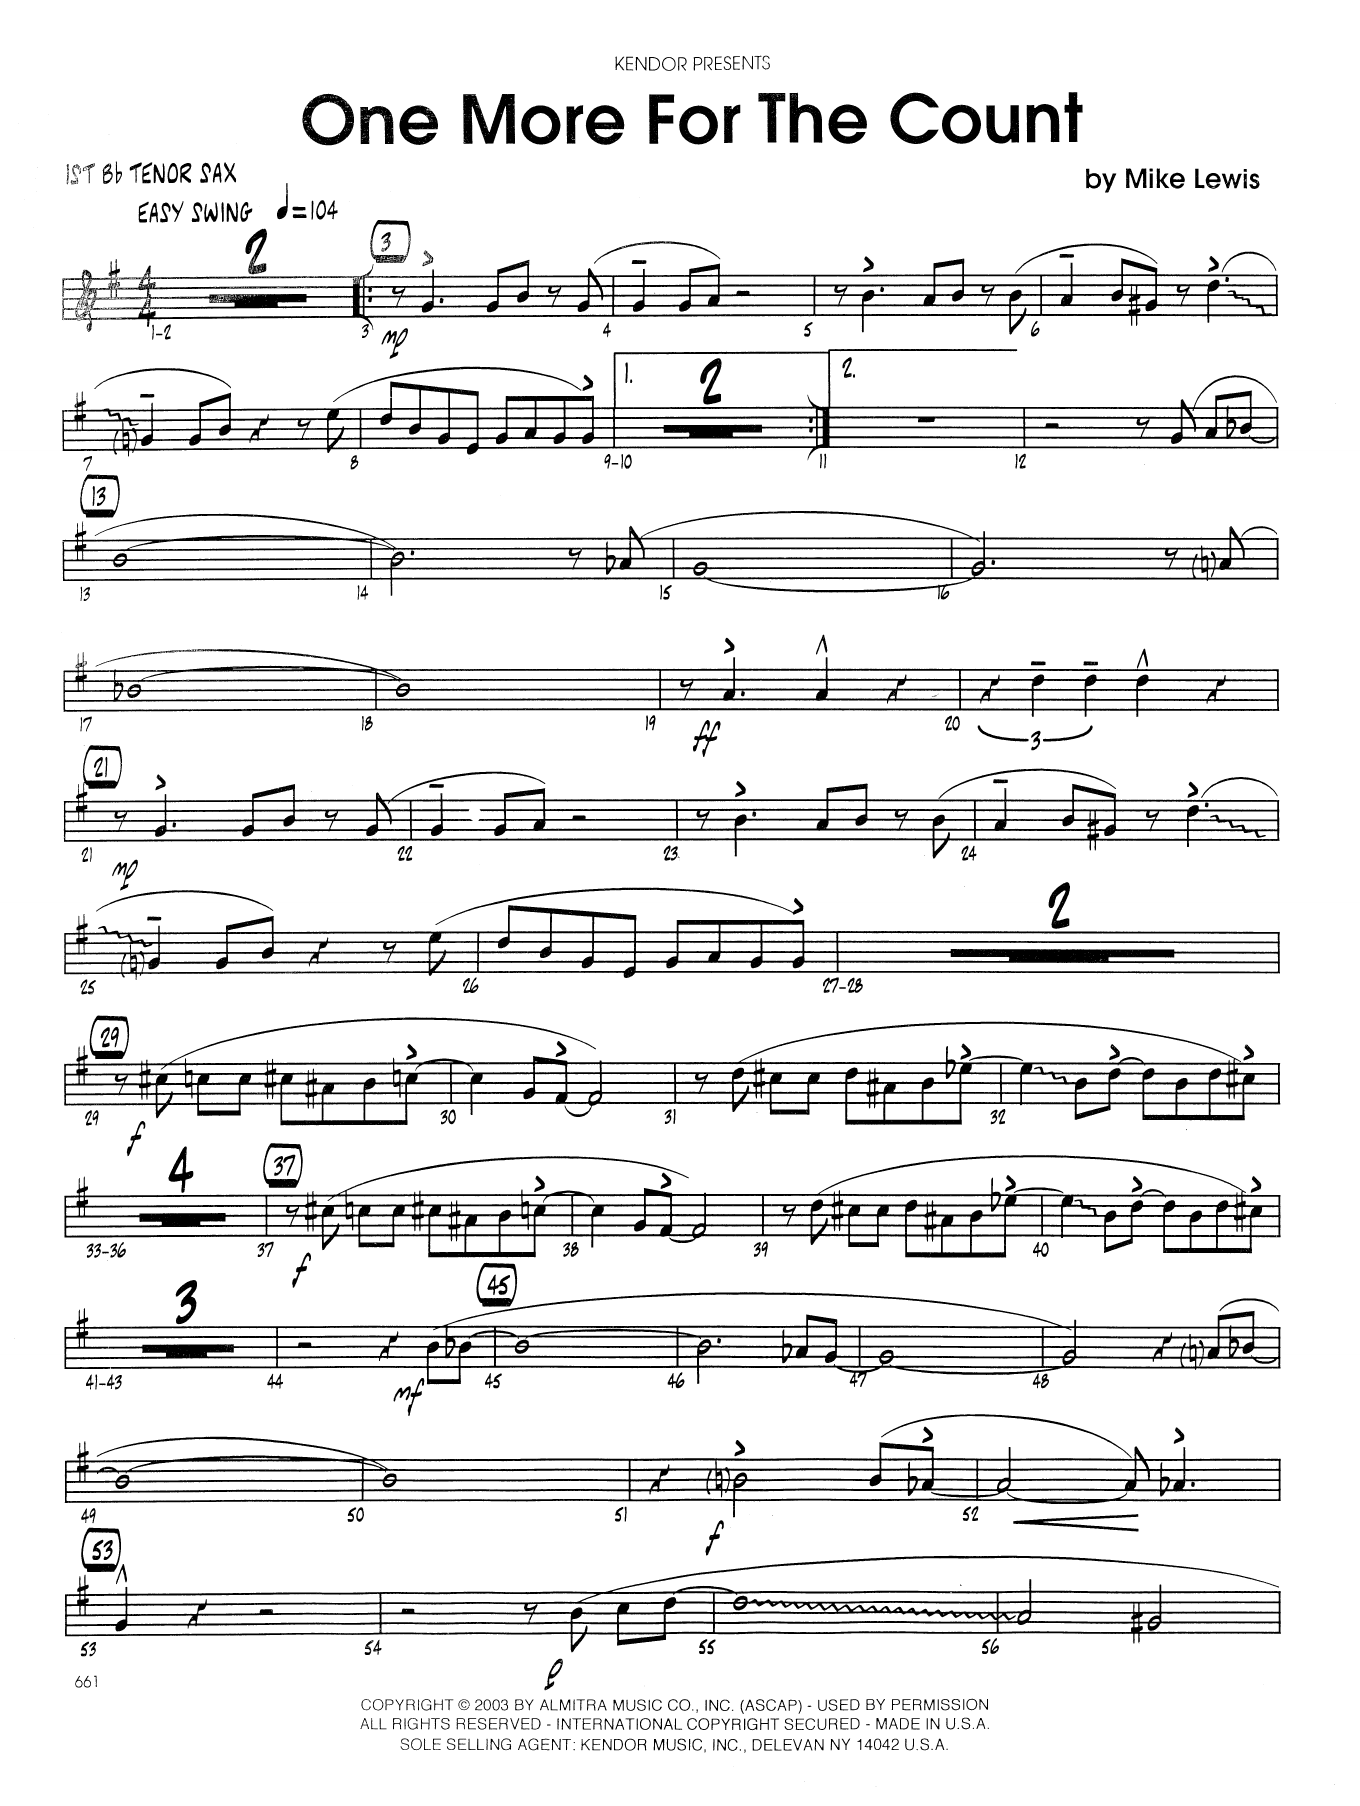 Download Mike Lewis One More For The Count - 1st Tenor Saxo Sheet Music